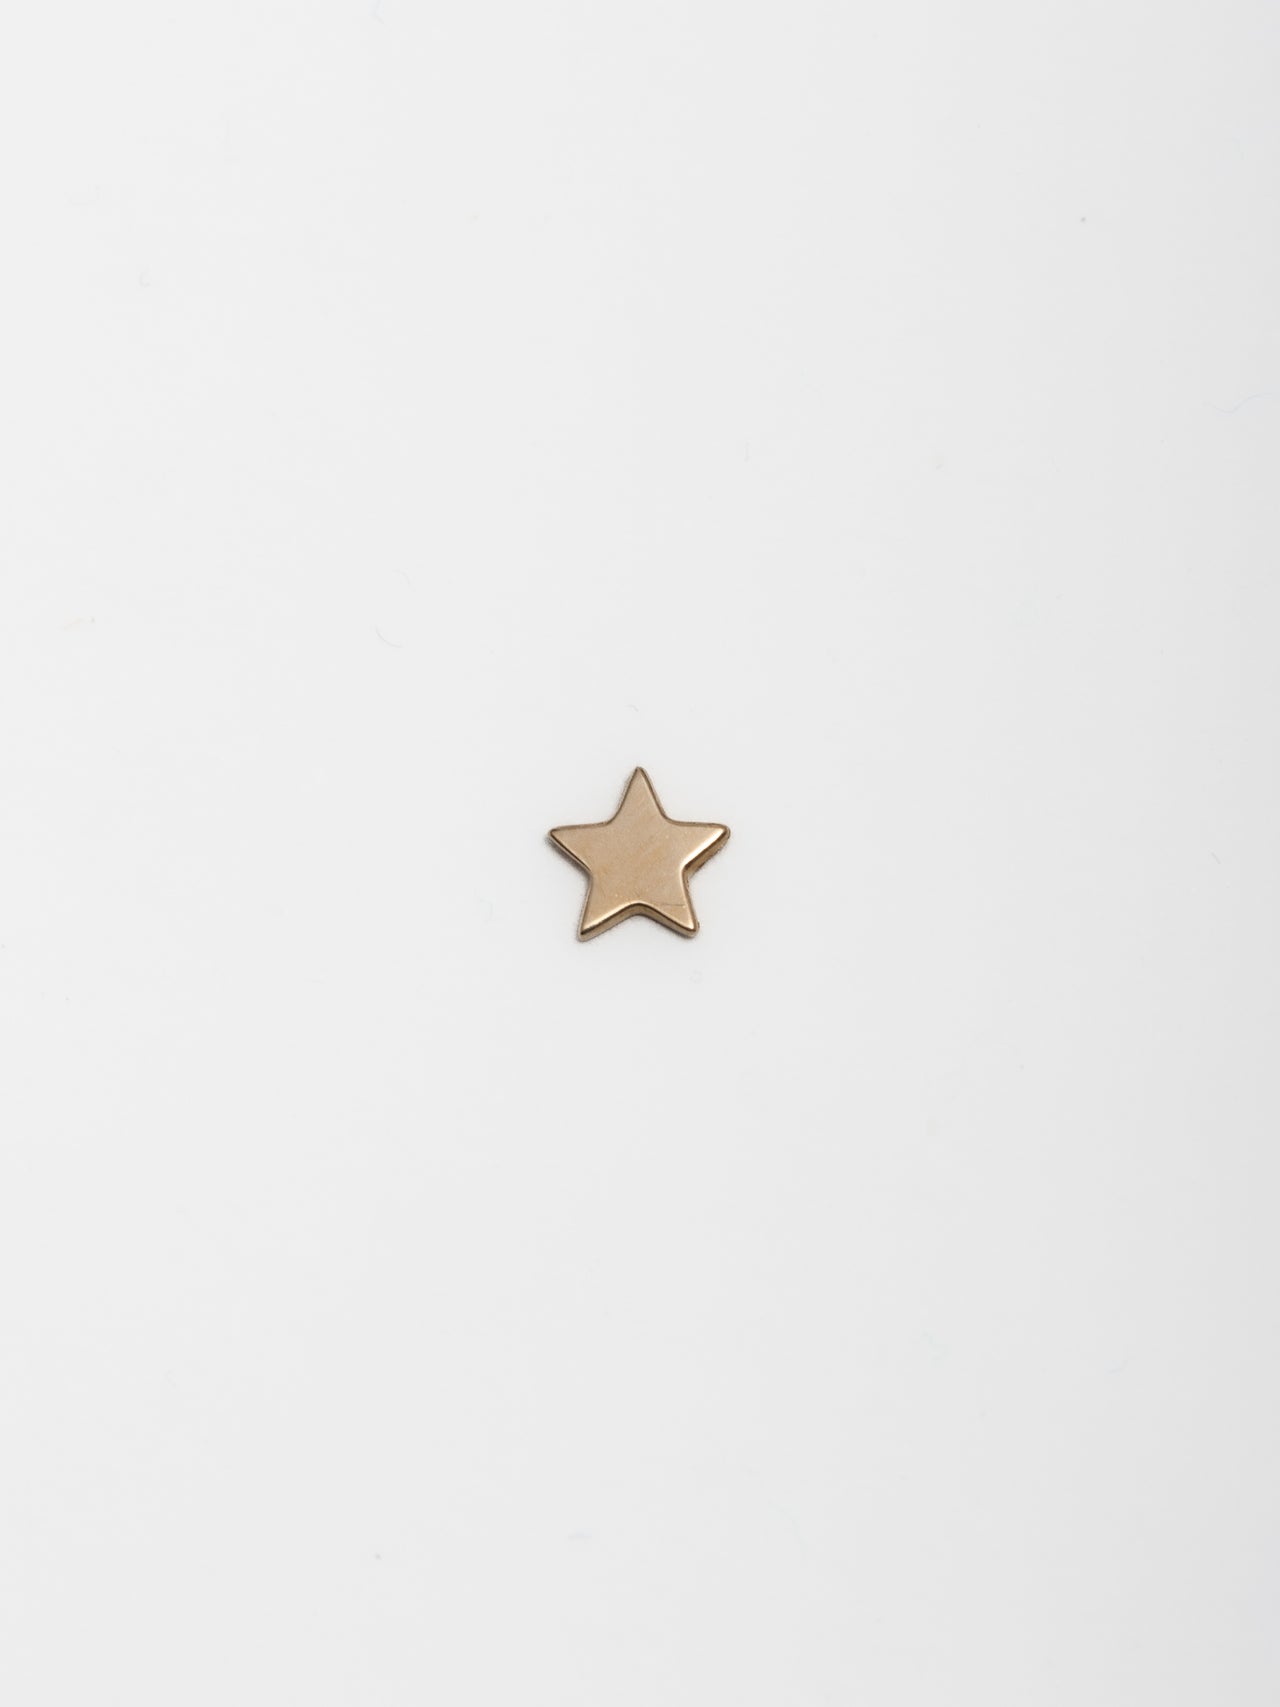 14kt Yellow Gold Mini Star Stud pictured on light grey background. 